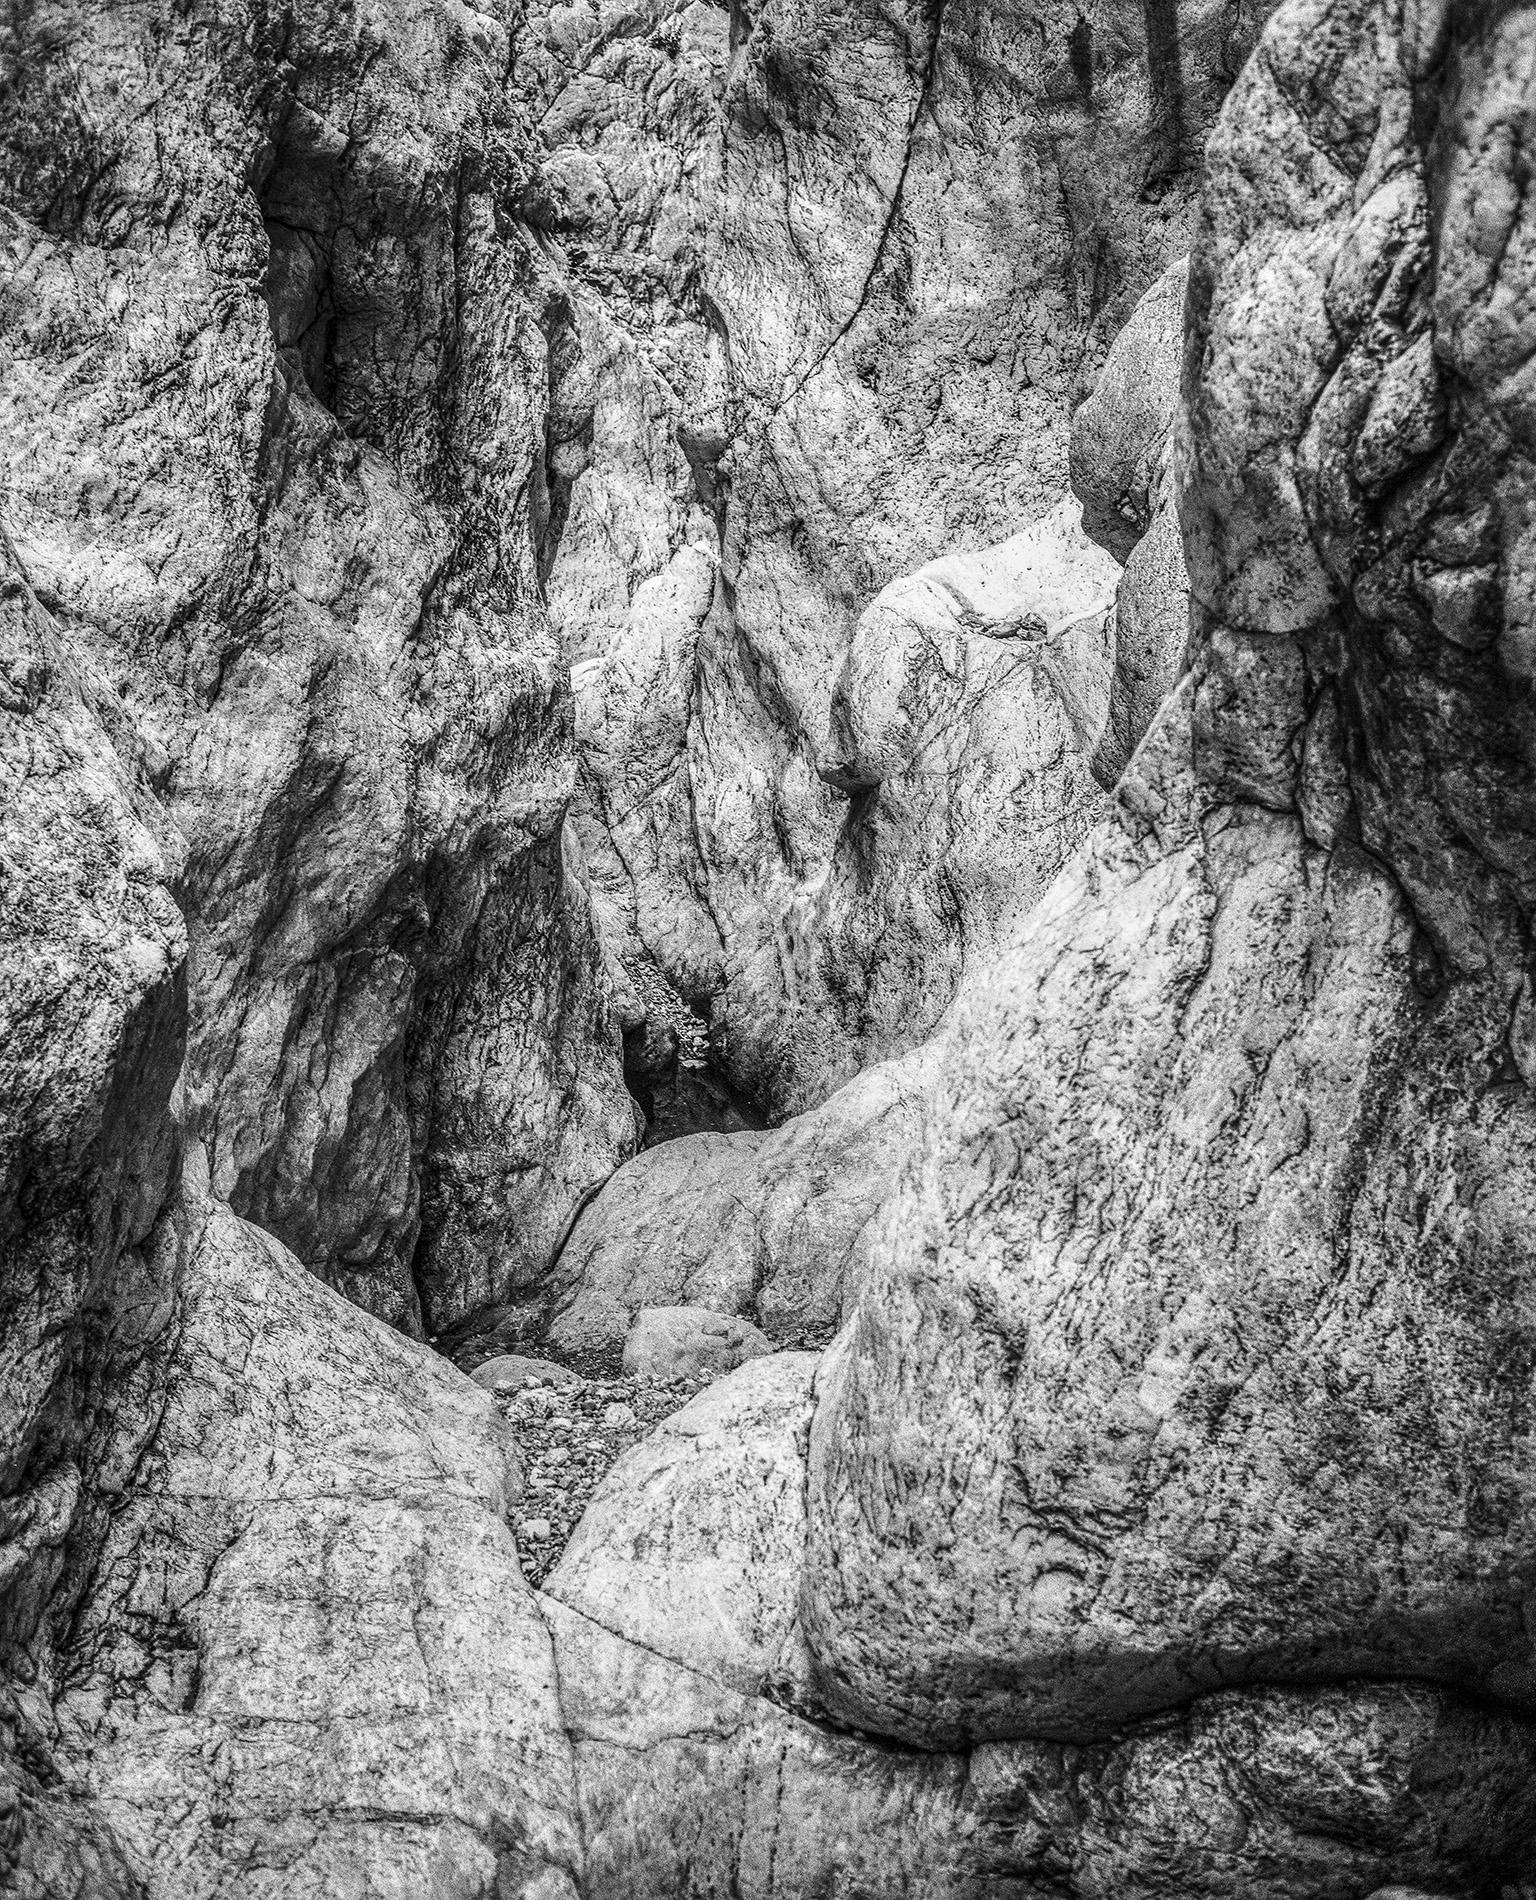 John Stathatos Black and White Photograph - Homage to Heraclitus: Earth IV - Black and White Landscape Photograph of a Cave